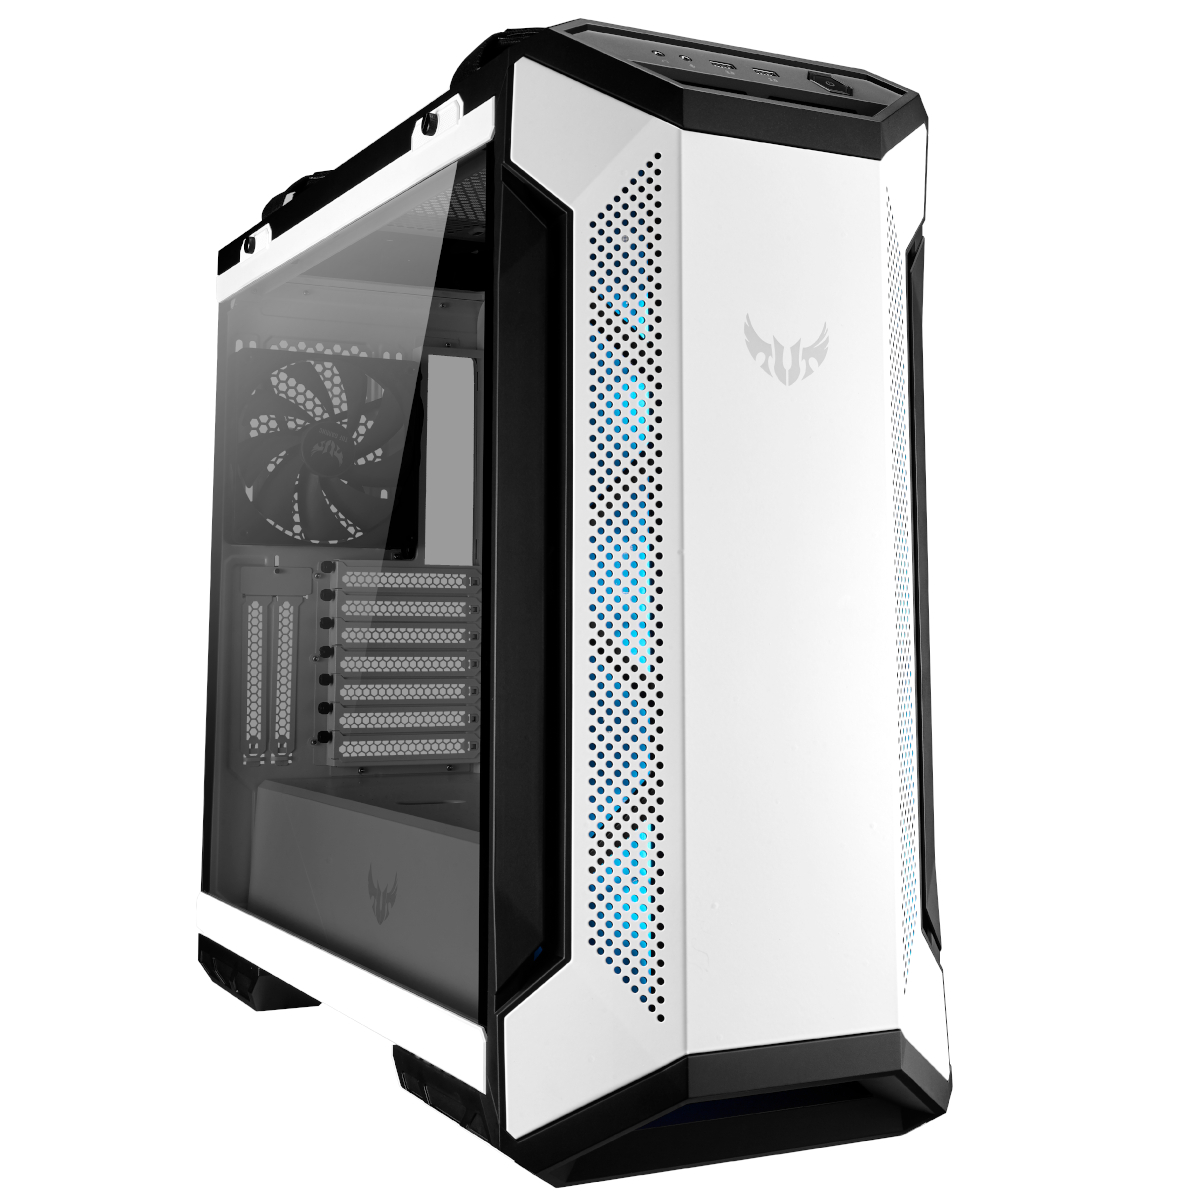 Asus - ASUS TUF Gaming GT501 Midi-Tower Case - White Tempered Glass